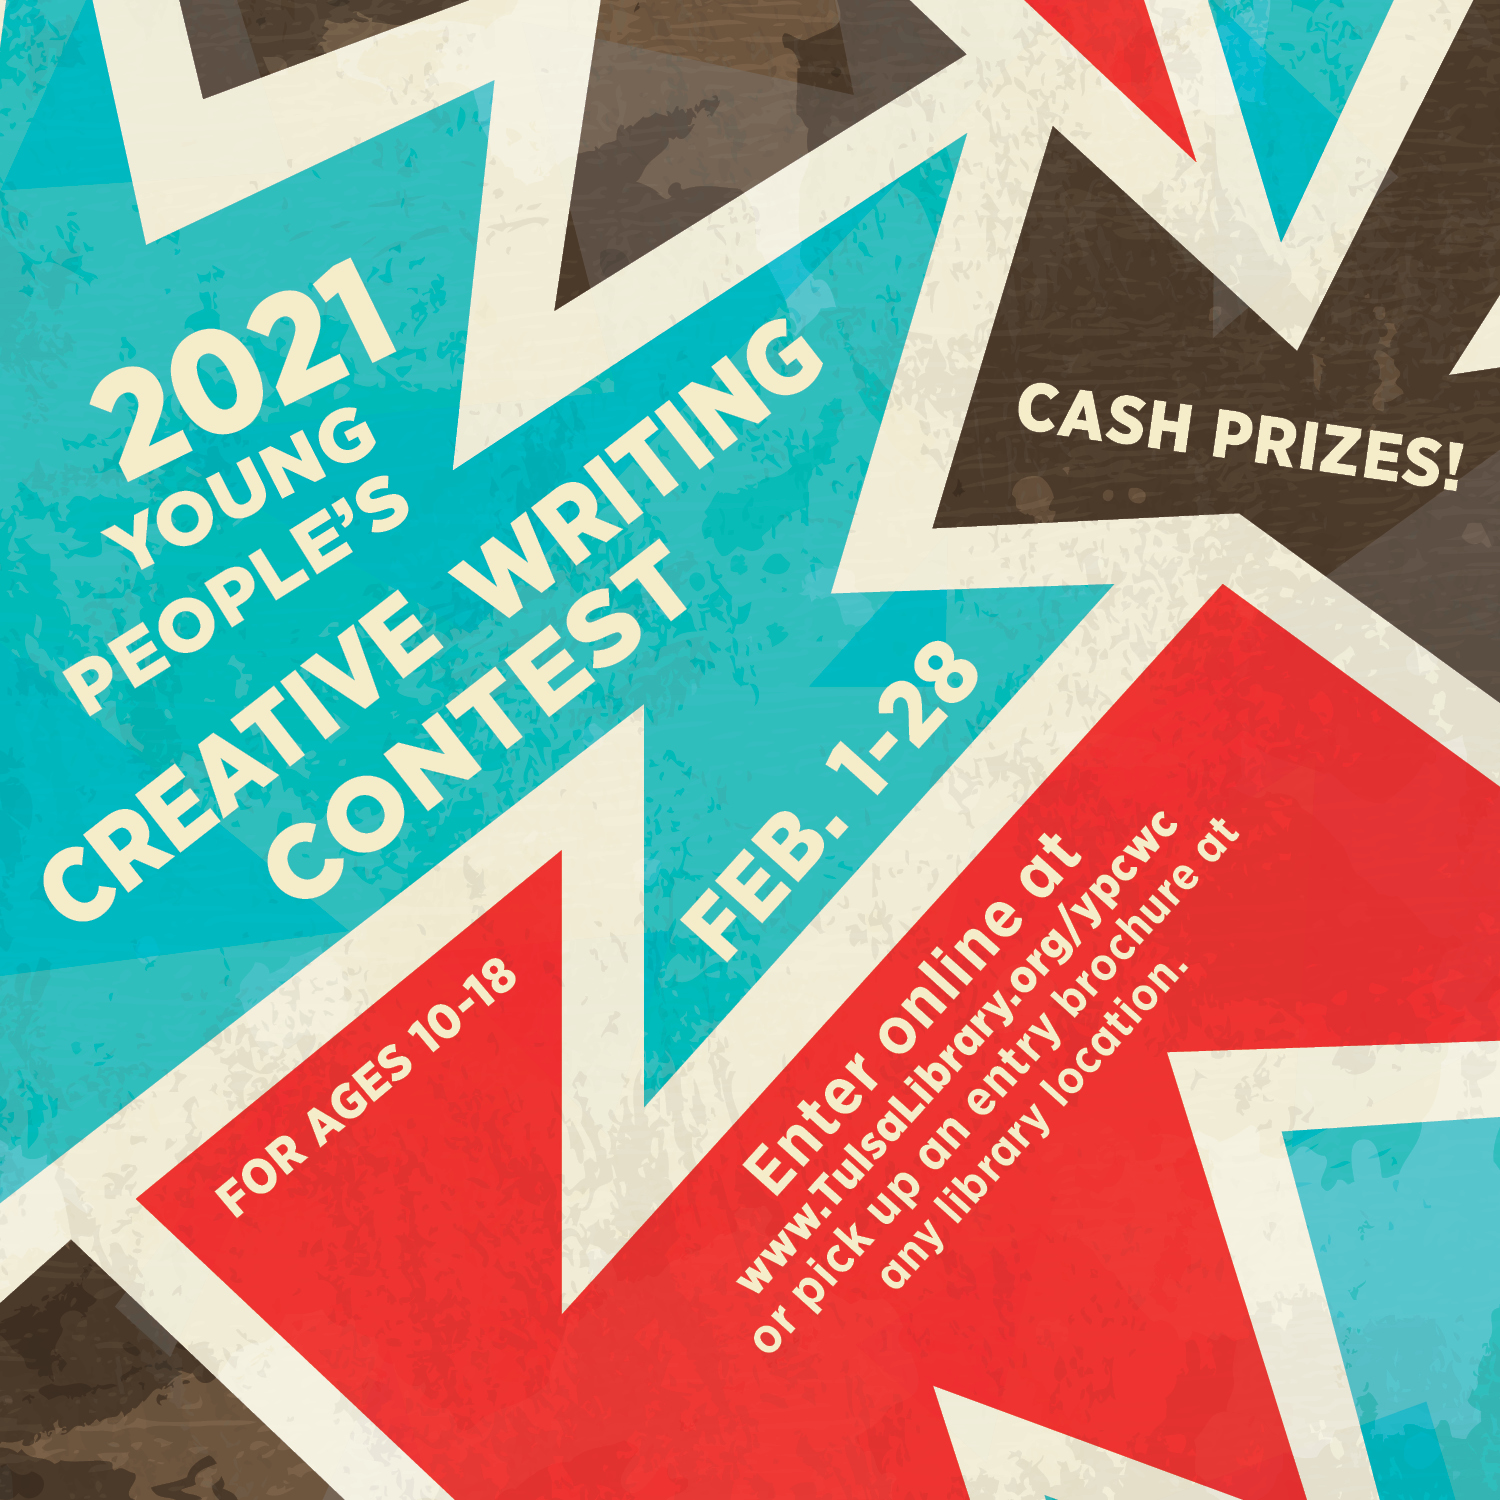 creative writing competitions youth